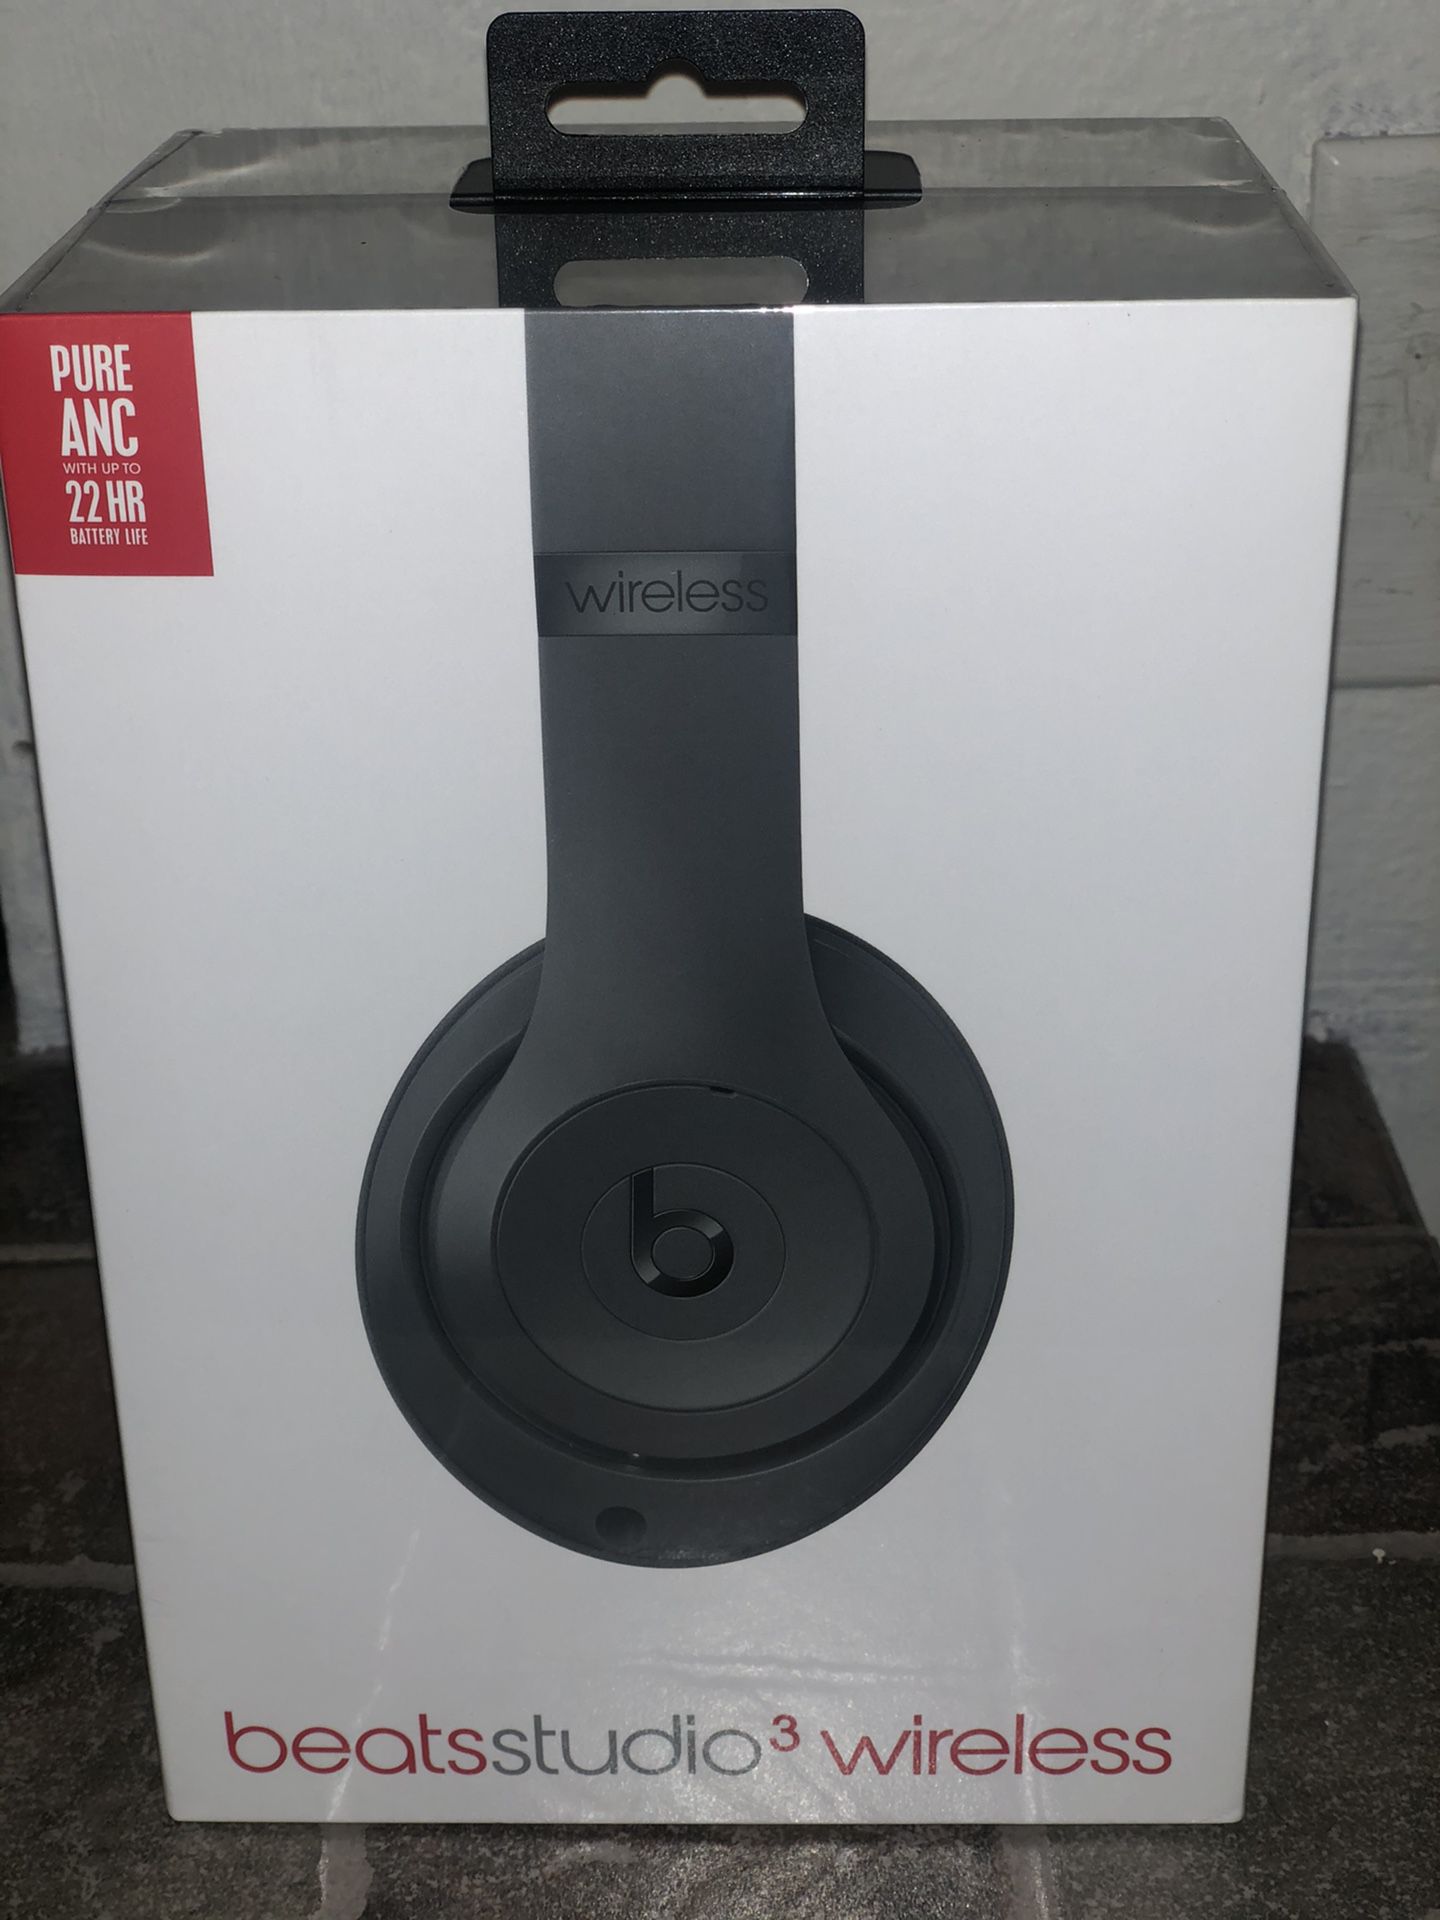 BEATS STUDIO 3 WIRELESS (sealed in box) $200 OBO pick up or shipped